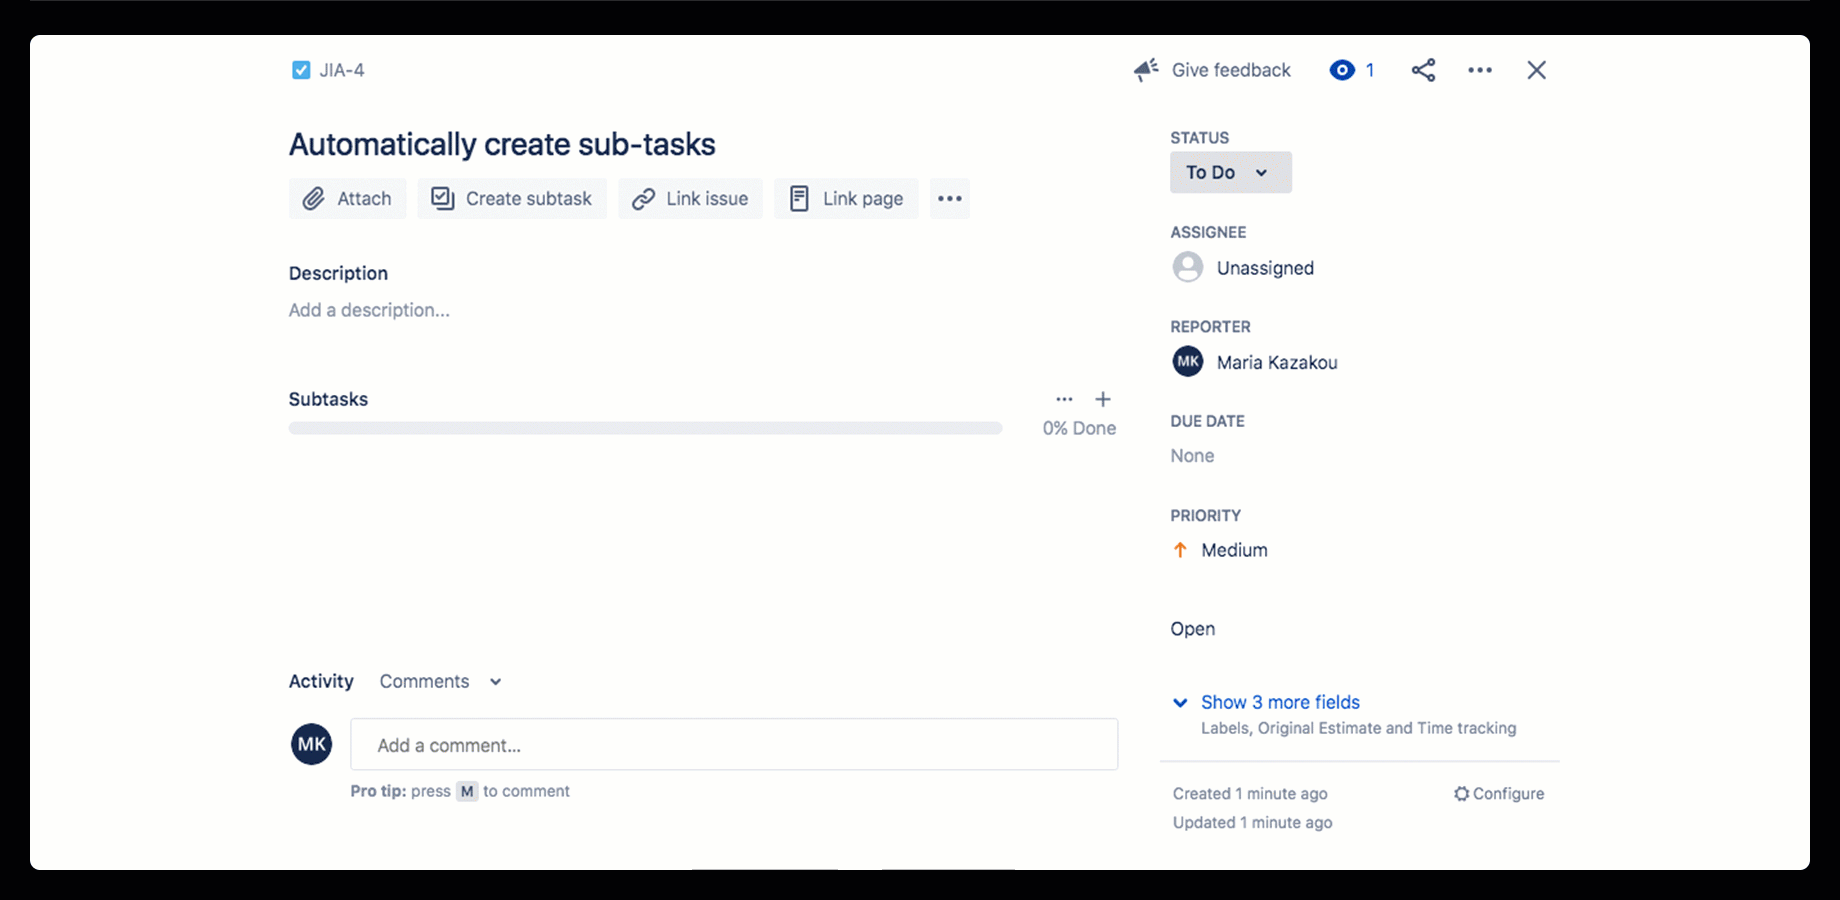 Animation of sub-tasks automatically created in a Jira issue